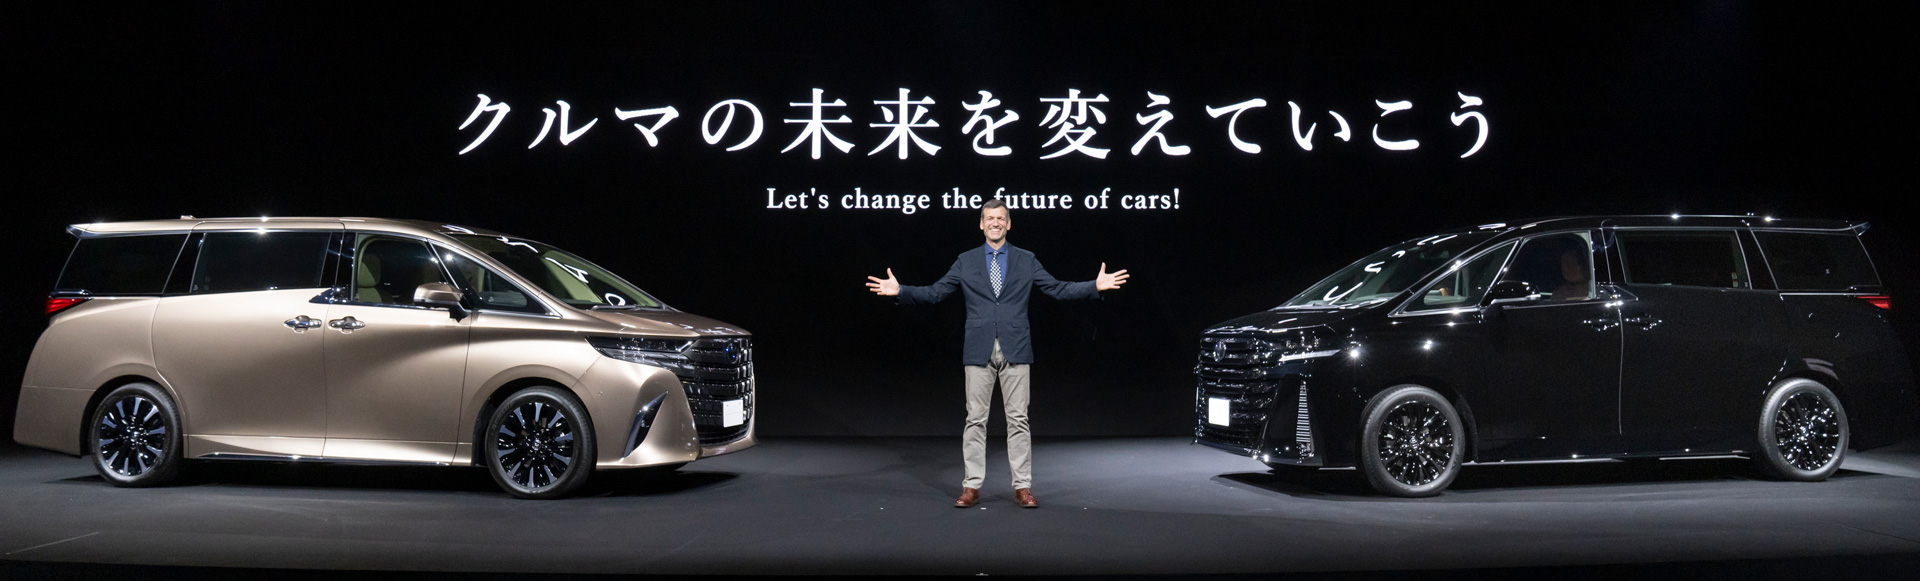 Presentation of the All-New Alphard and Vellfire